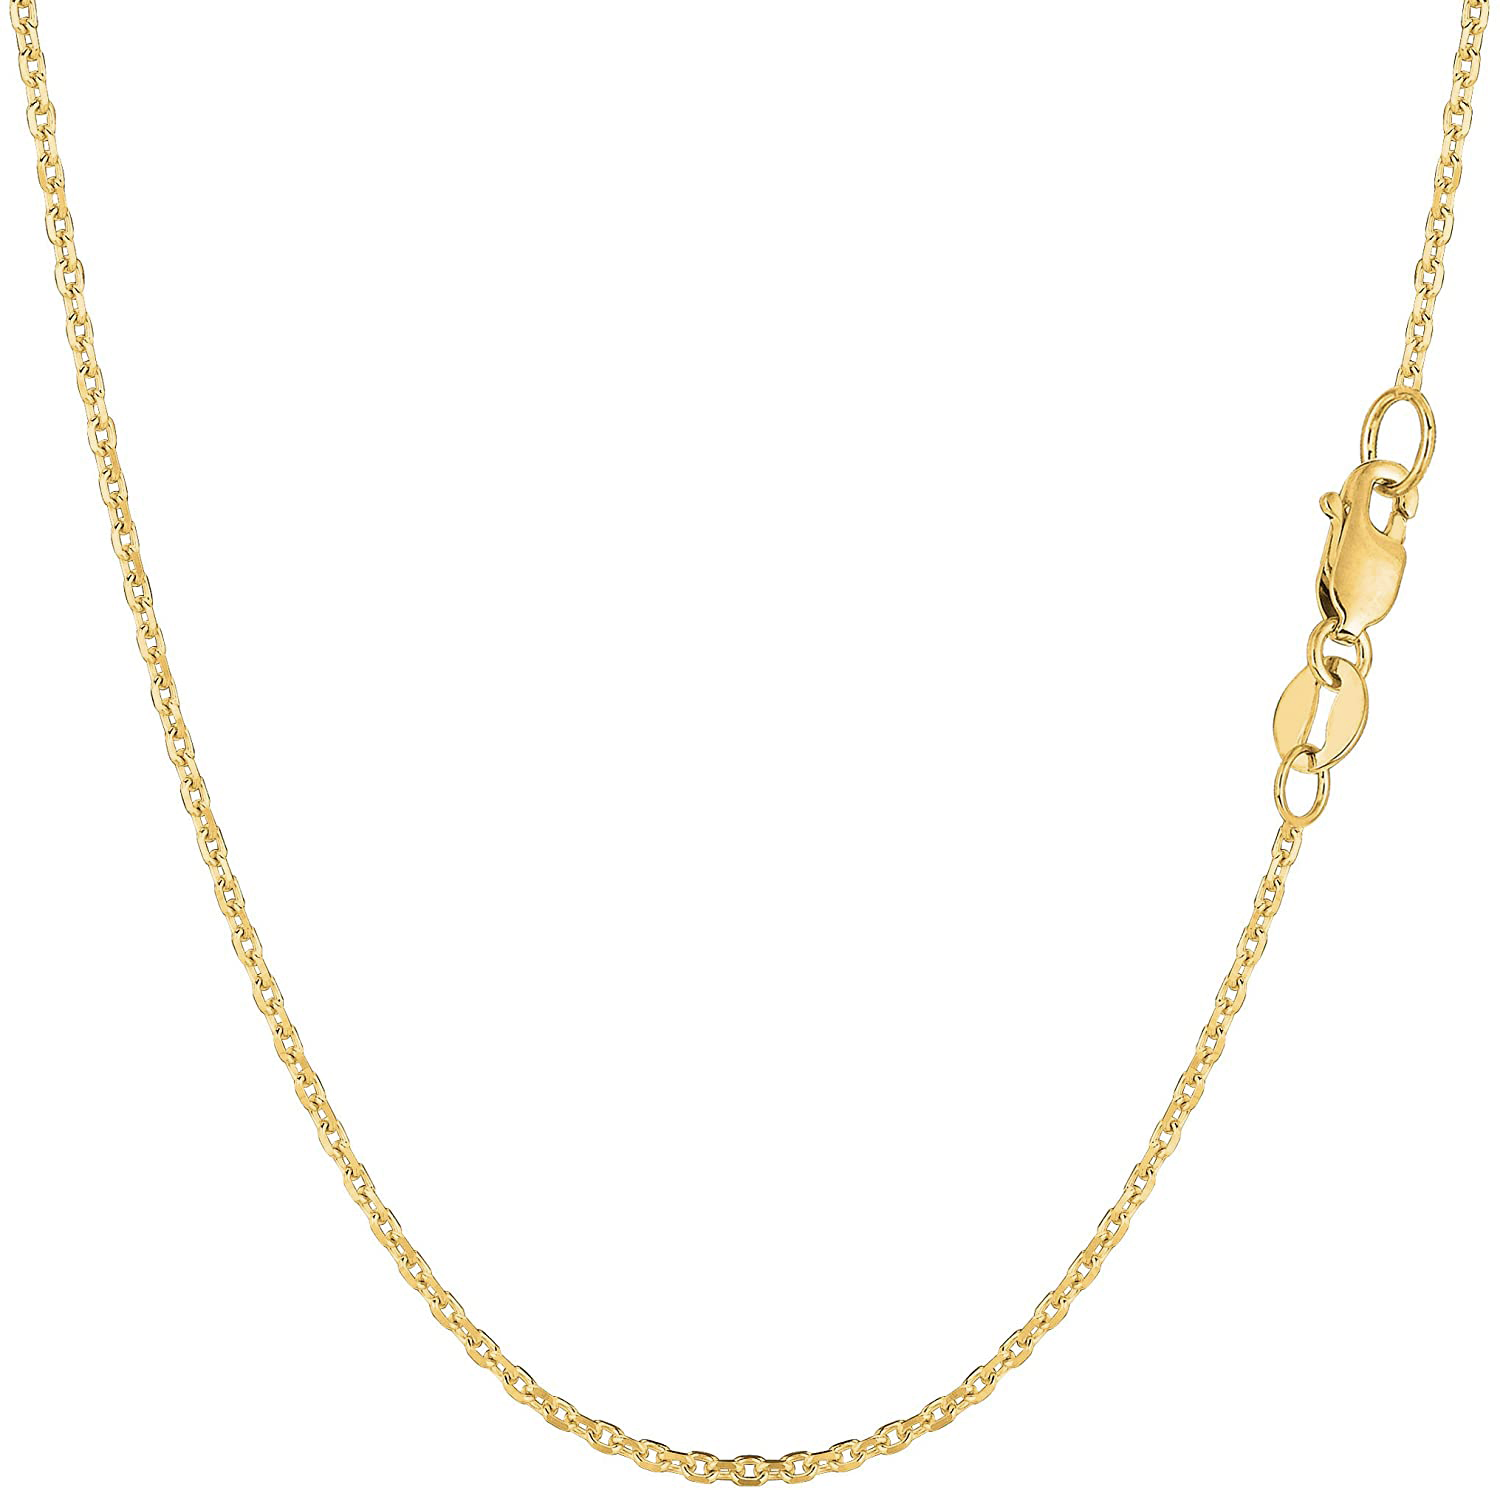 Medium Cable Link Chain Necklace in 14k Yellow Gold